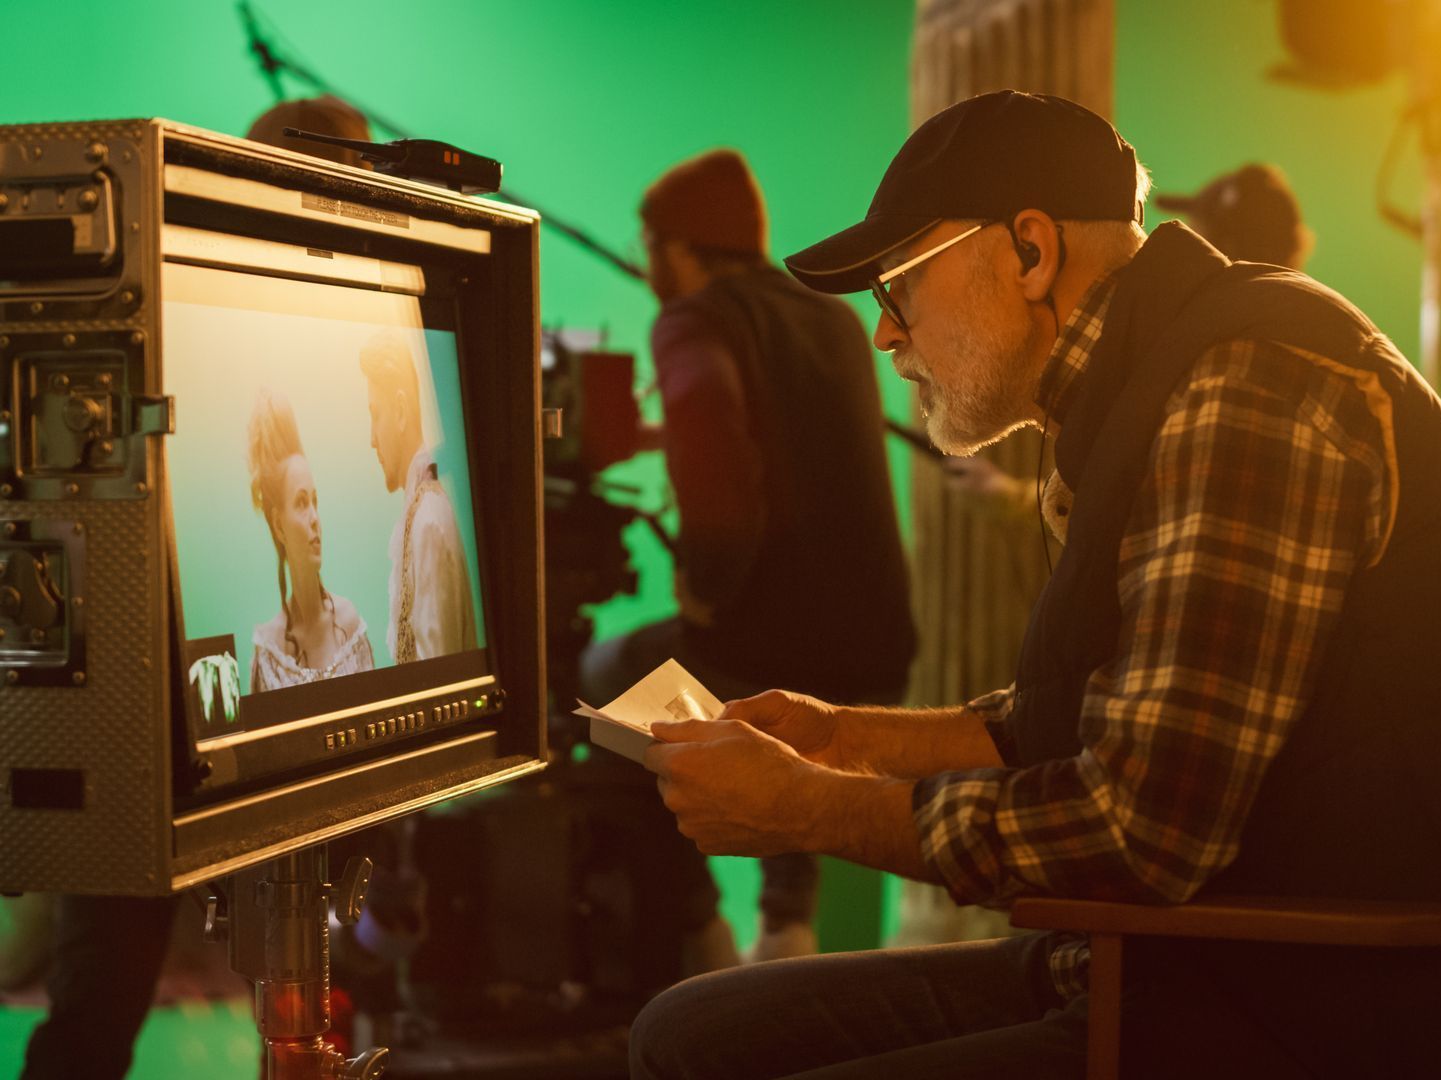 How To Choose The Right Video Production Company